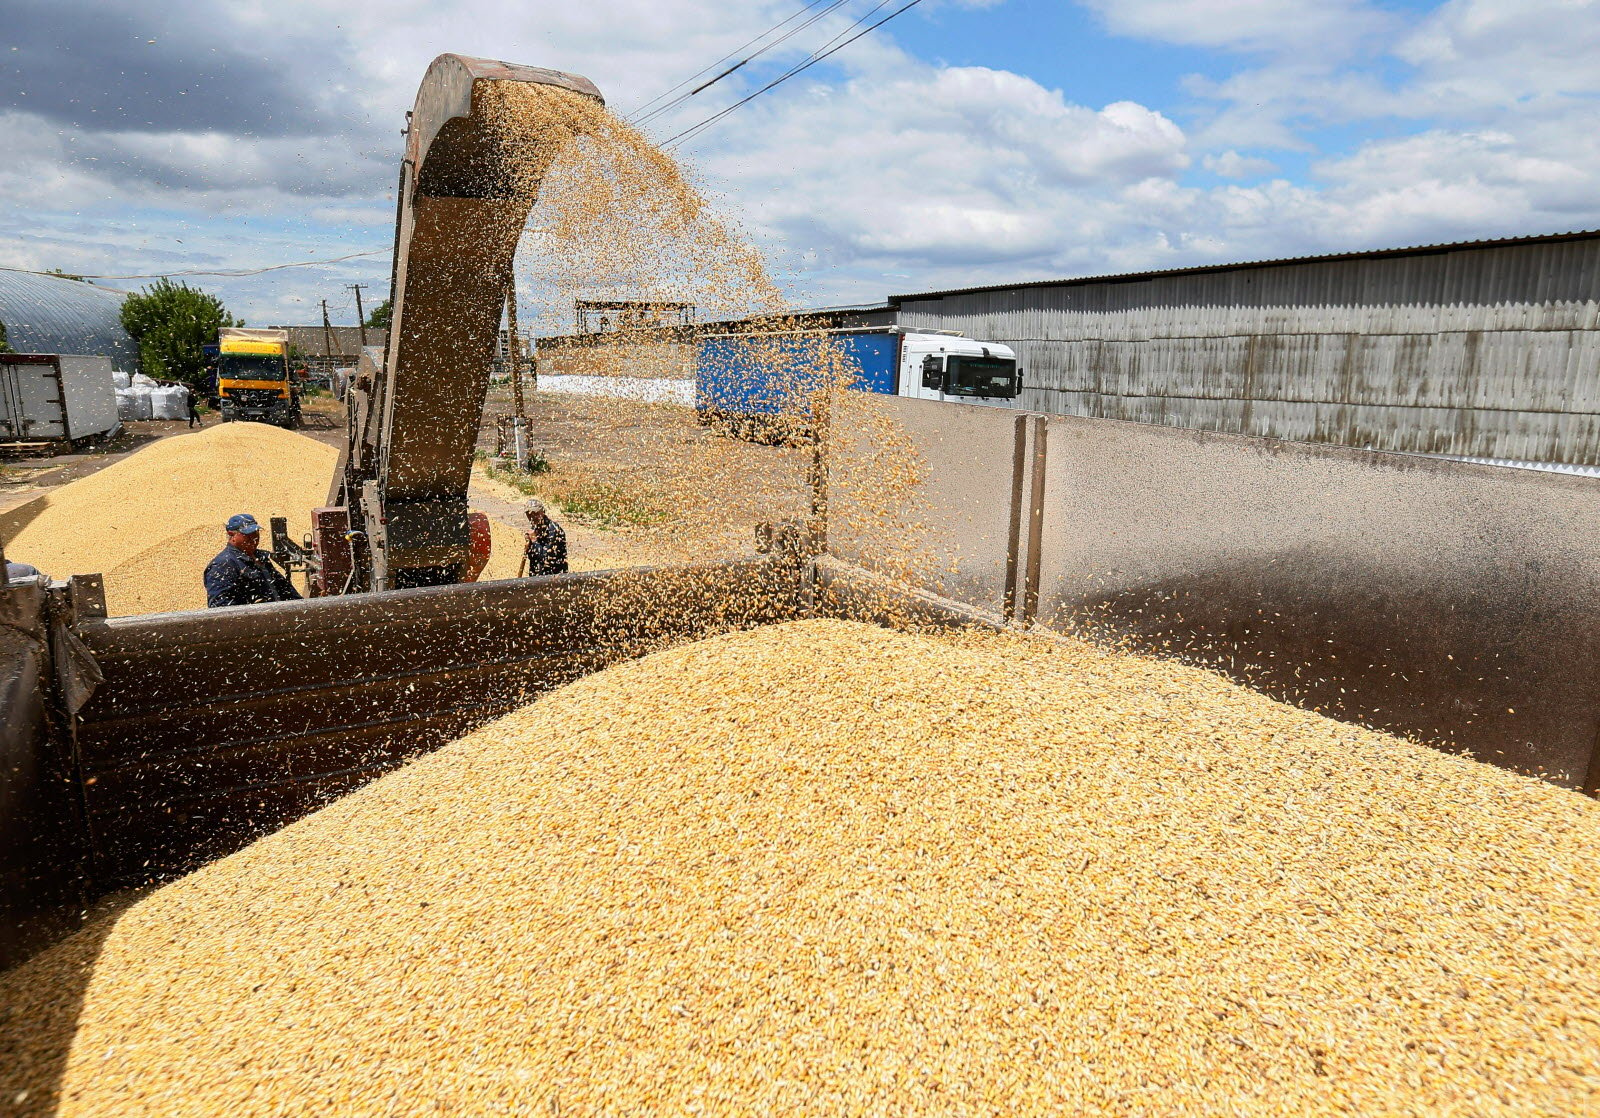 Ukraine proposes to create grain hubs in African ports